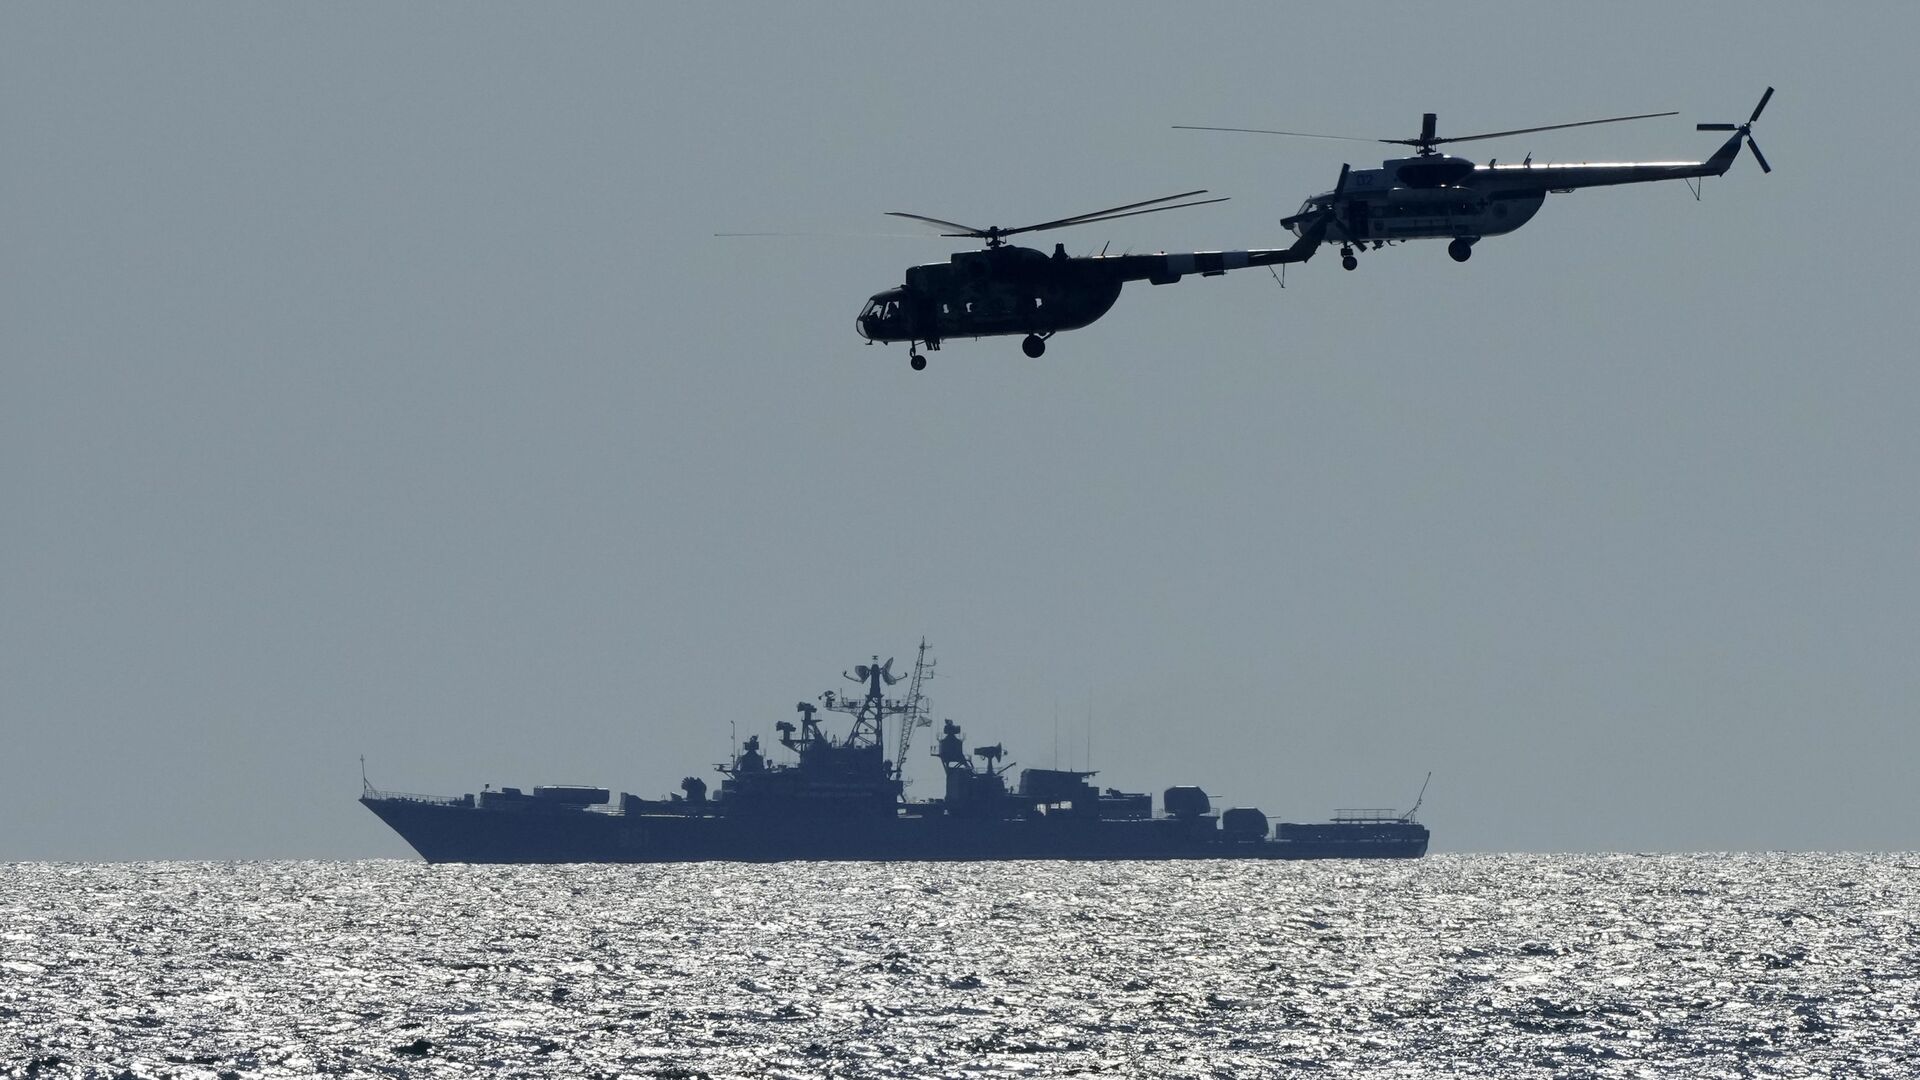 Ukrainian helicopters fly over a Russian warship  during Sea Breeze 2021 maneuvers, in the Black Sea, Friday, July 9, 2021 - Sputnik International, 1920, 30.12.2021